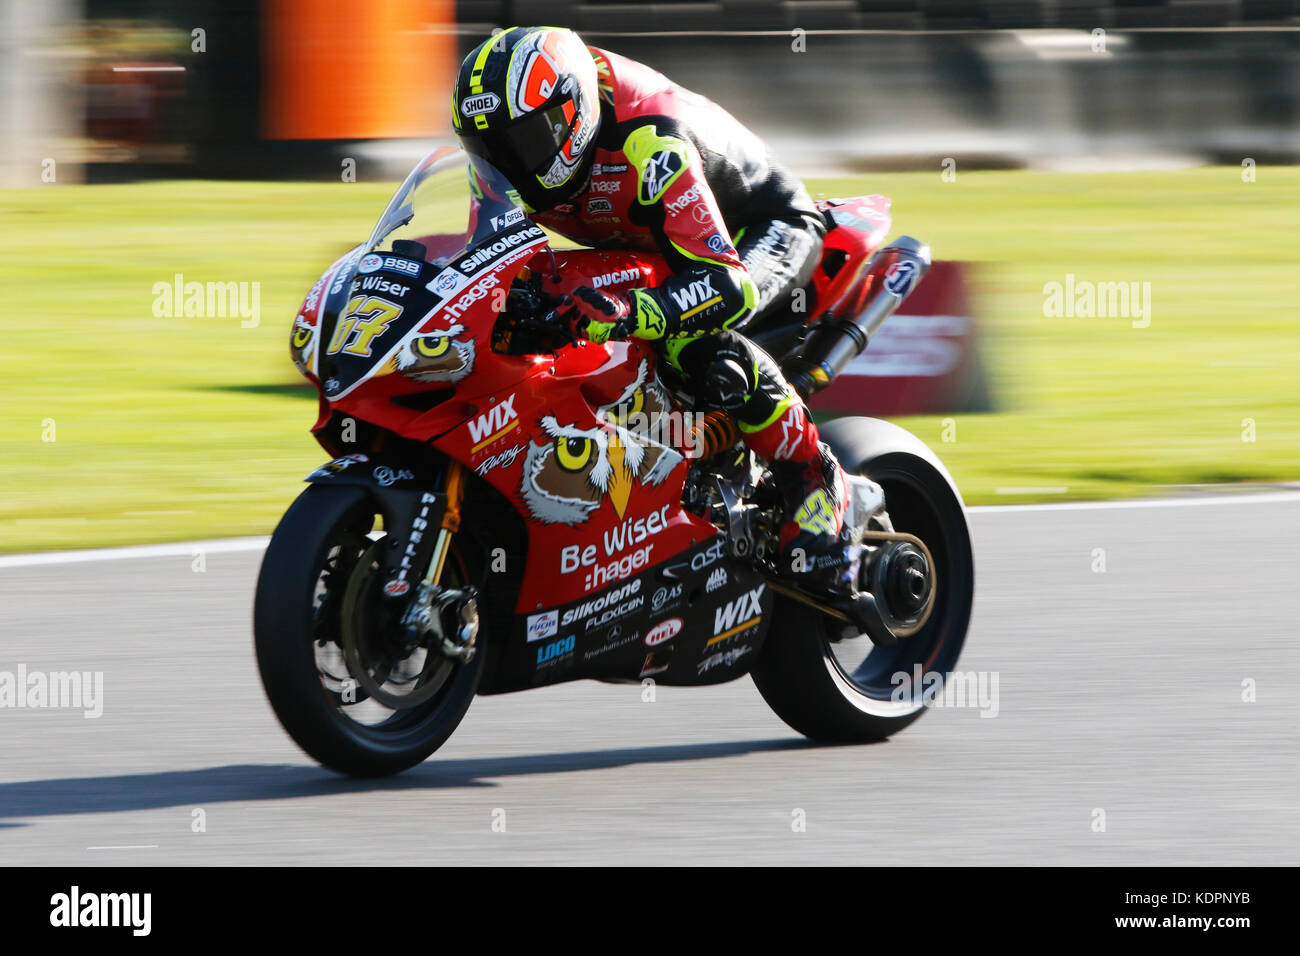 Bsb Champion High Resolution Stock Photography and Images - Alamy